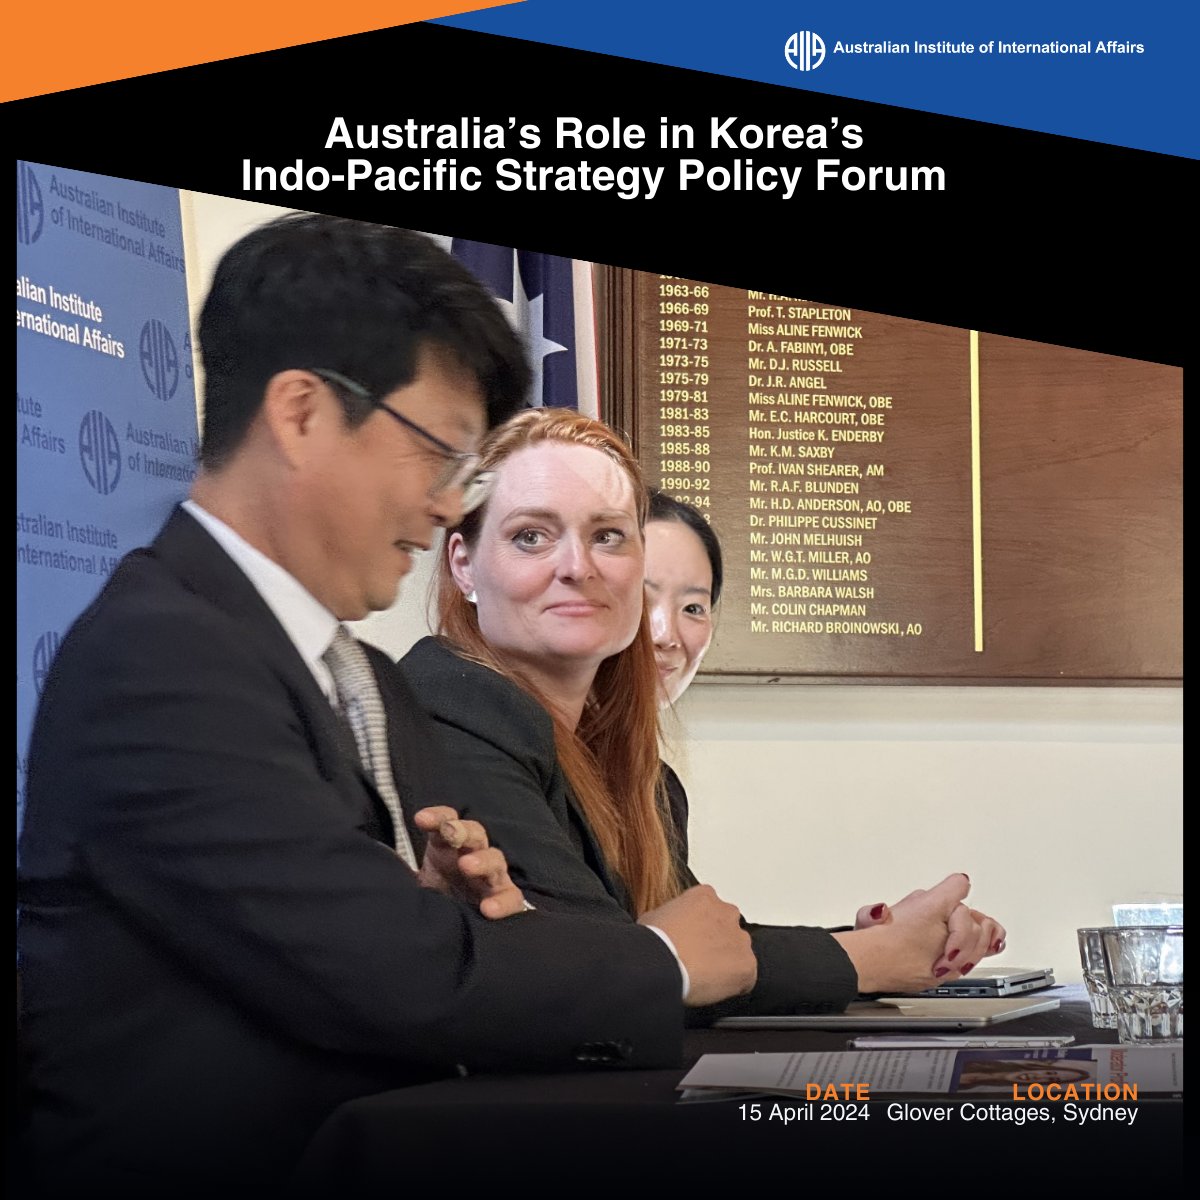 Thank you for those who attended ‘Australia’s Role in Korea’s Indo-Pacific Strategy Forum’ at the Glover Cottages in Sydney last Monday. Looking forward to seeing you at our next event. Stay tuned to our social media page! Check more photos from the event below👇